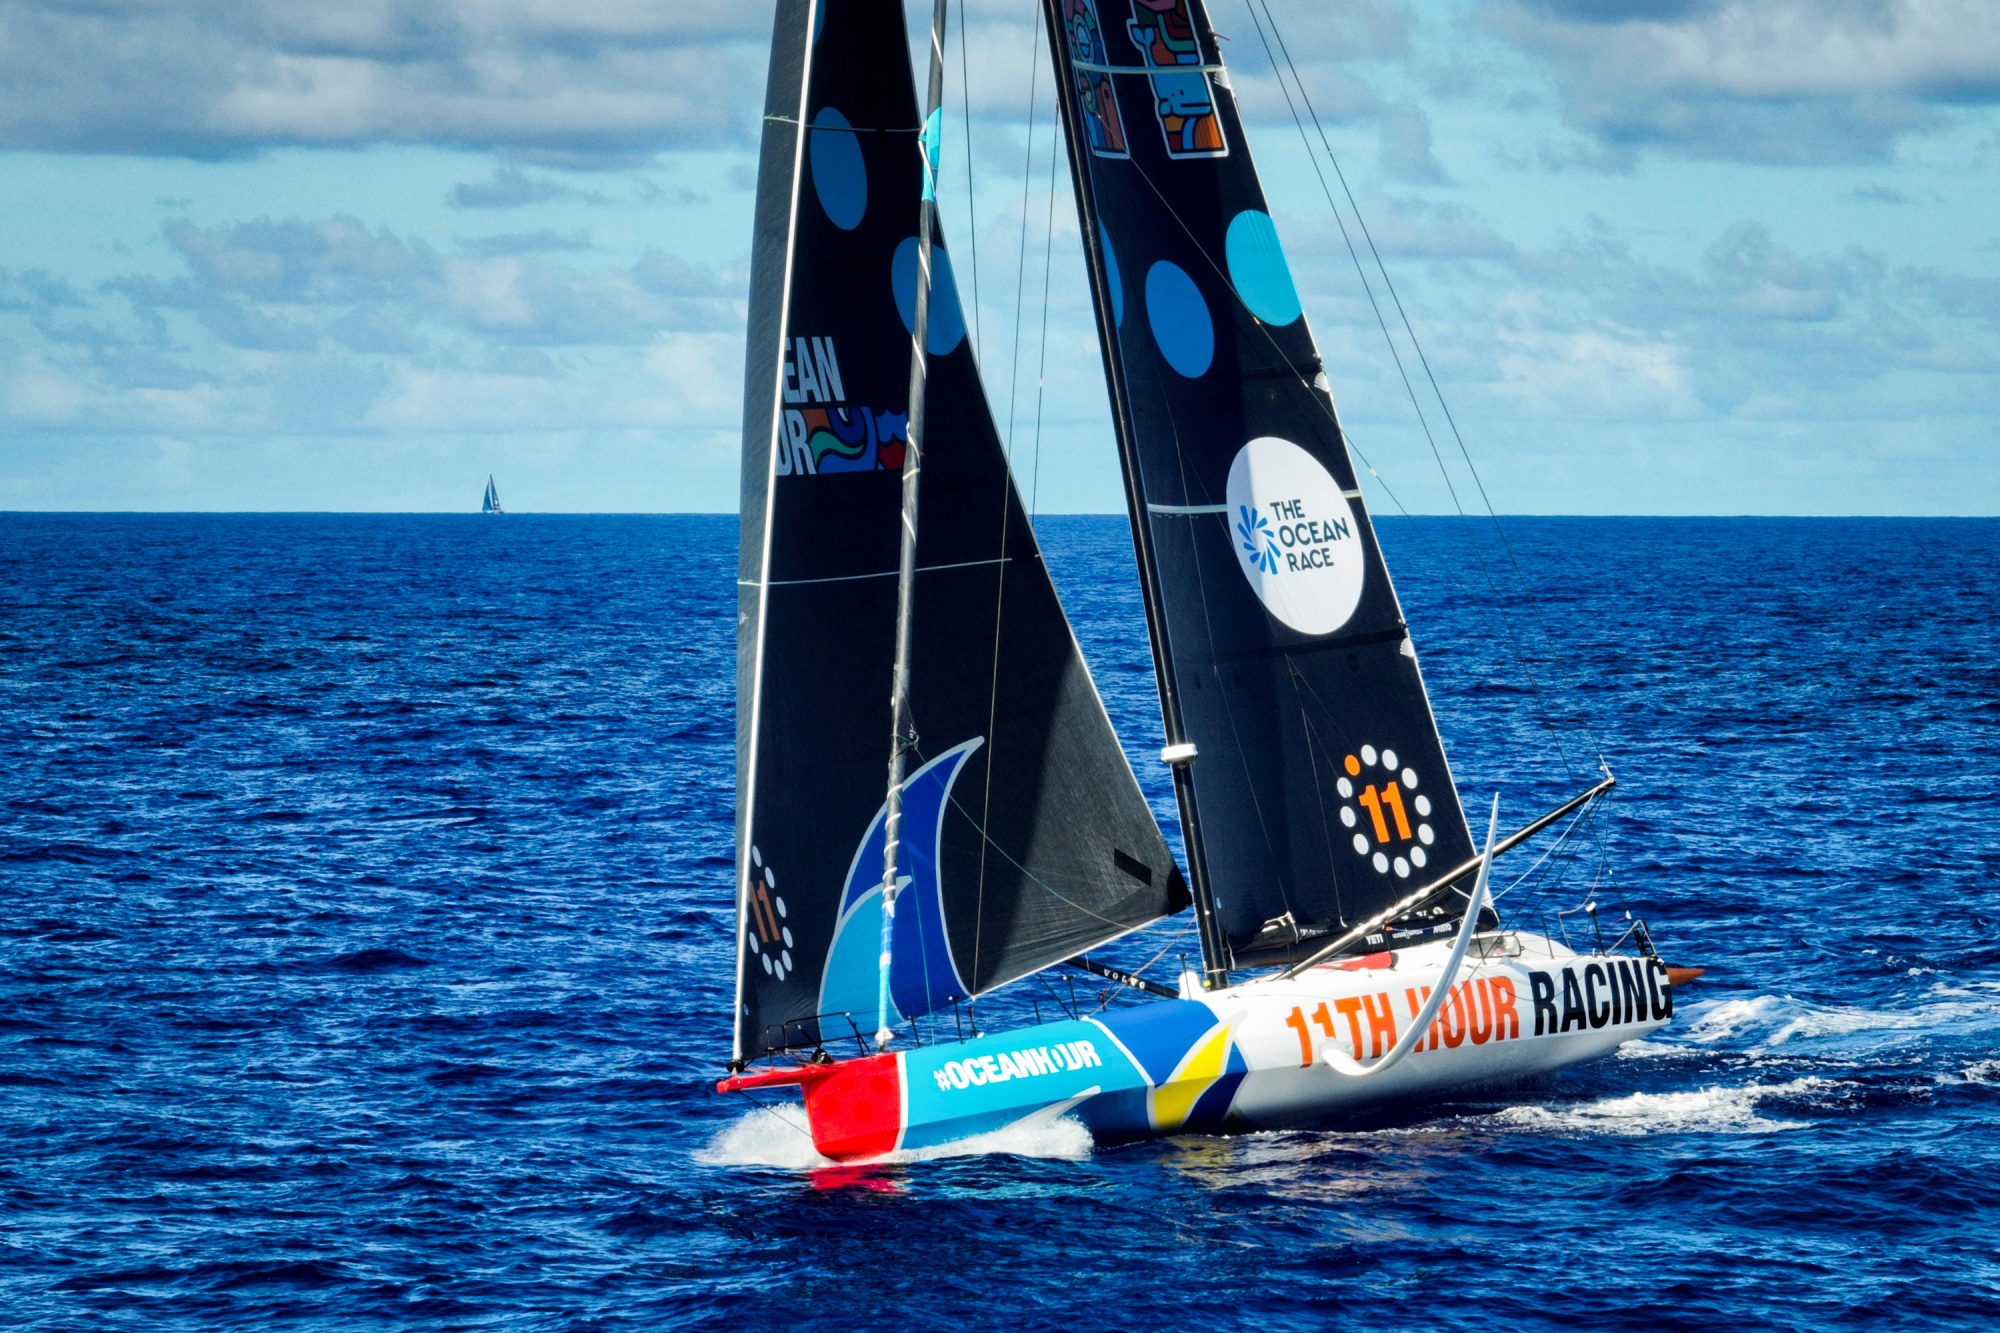 The 11th Hour Racing Team goes upwind in a steady nine knots off the northeast coast of Brazil during The Ocean Race.